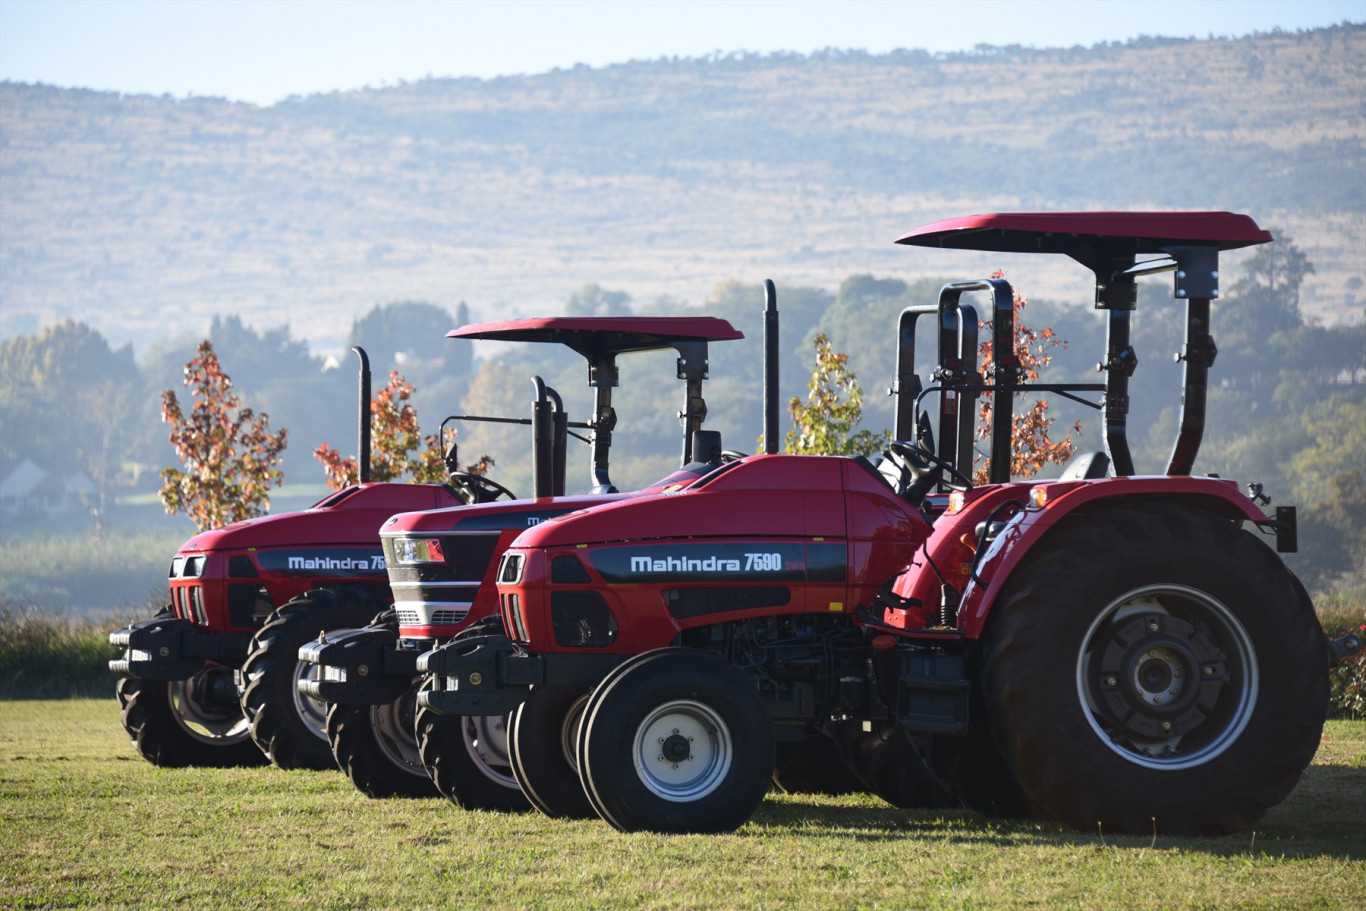 Mahindra introduces its range of tough and efficient farming equipment to South Africa